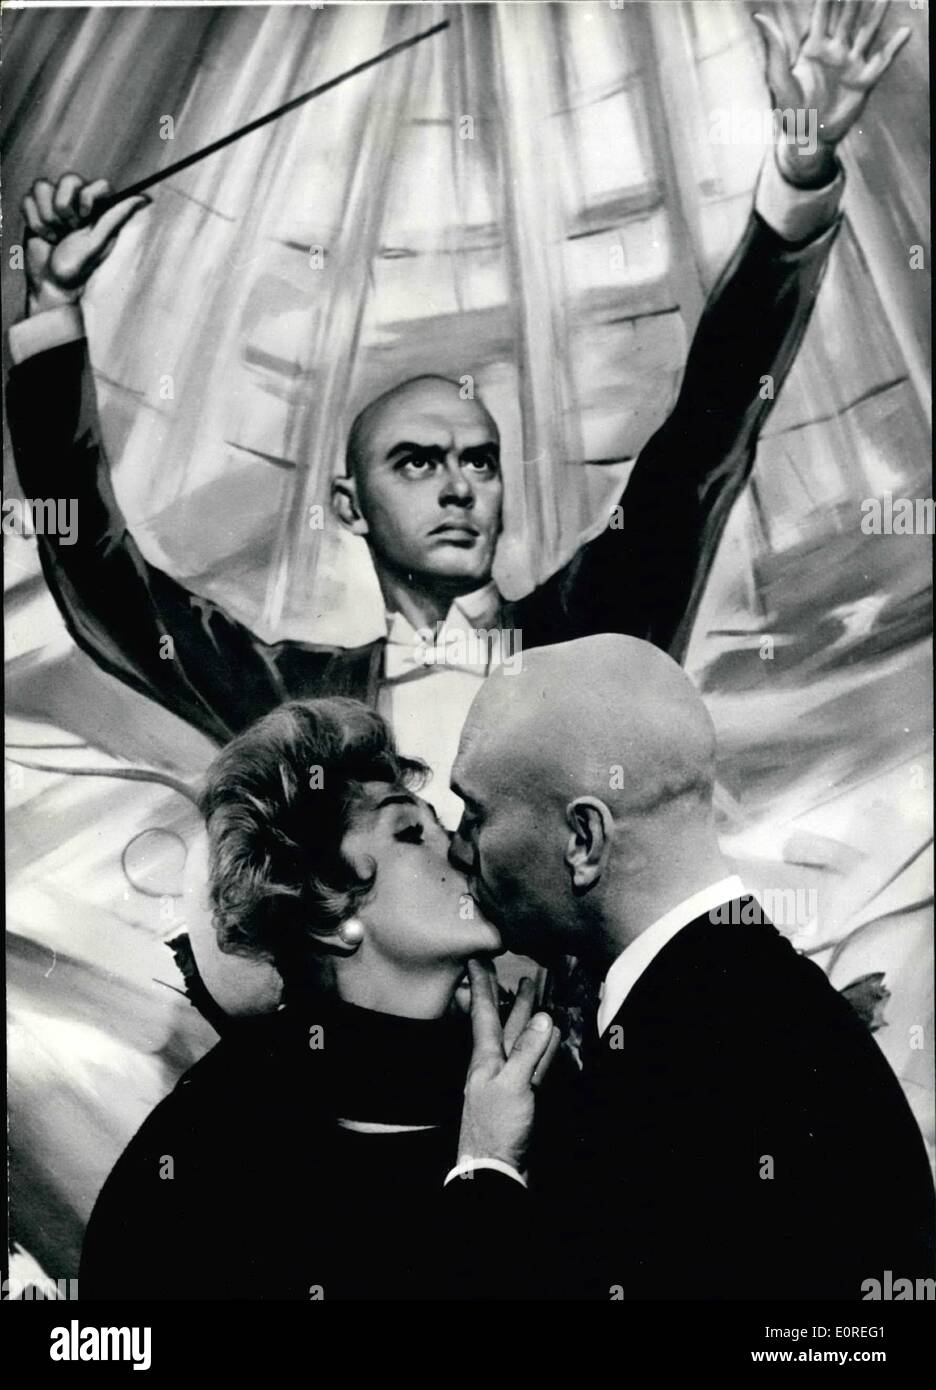 Apr. 04, 1959 - Yule Brynner Films in Paris: The famous American actor is in Paris now for the filming of ''Once more with feeling'', produced and directed by Stanley Donen. IN this film, Yul Brynner plays the part of a Conductor. photo shows A Scene of the film : Yul Brynner with his partner, Kay Kendall. Stock Photo